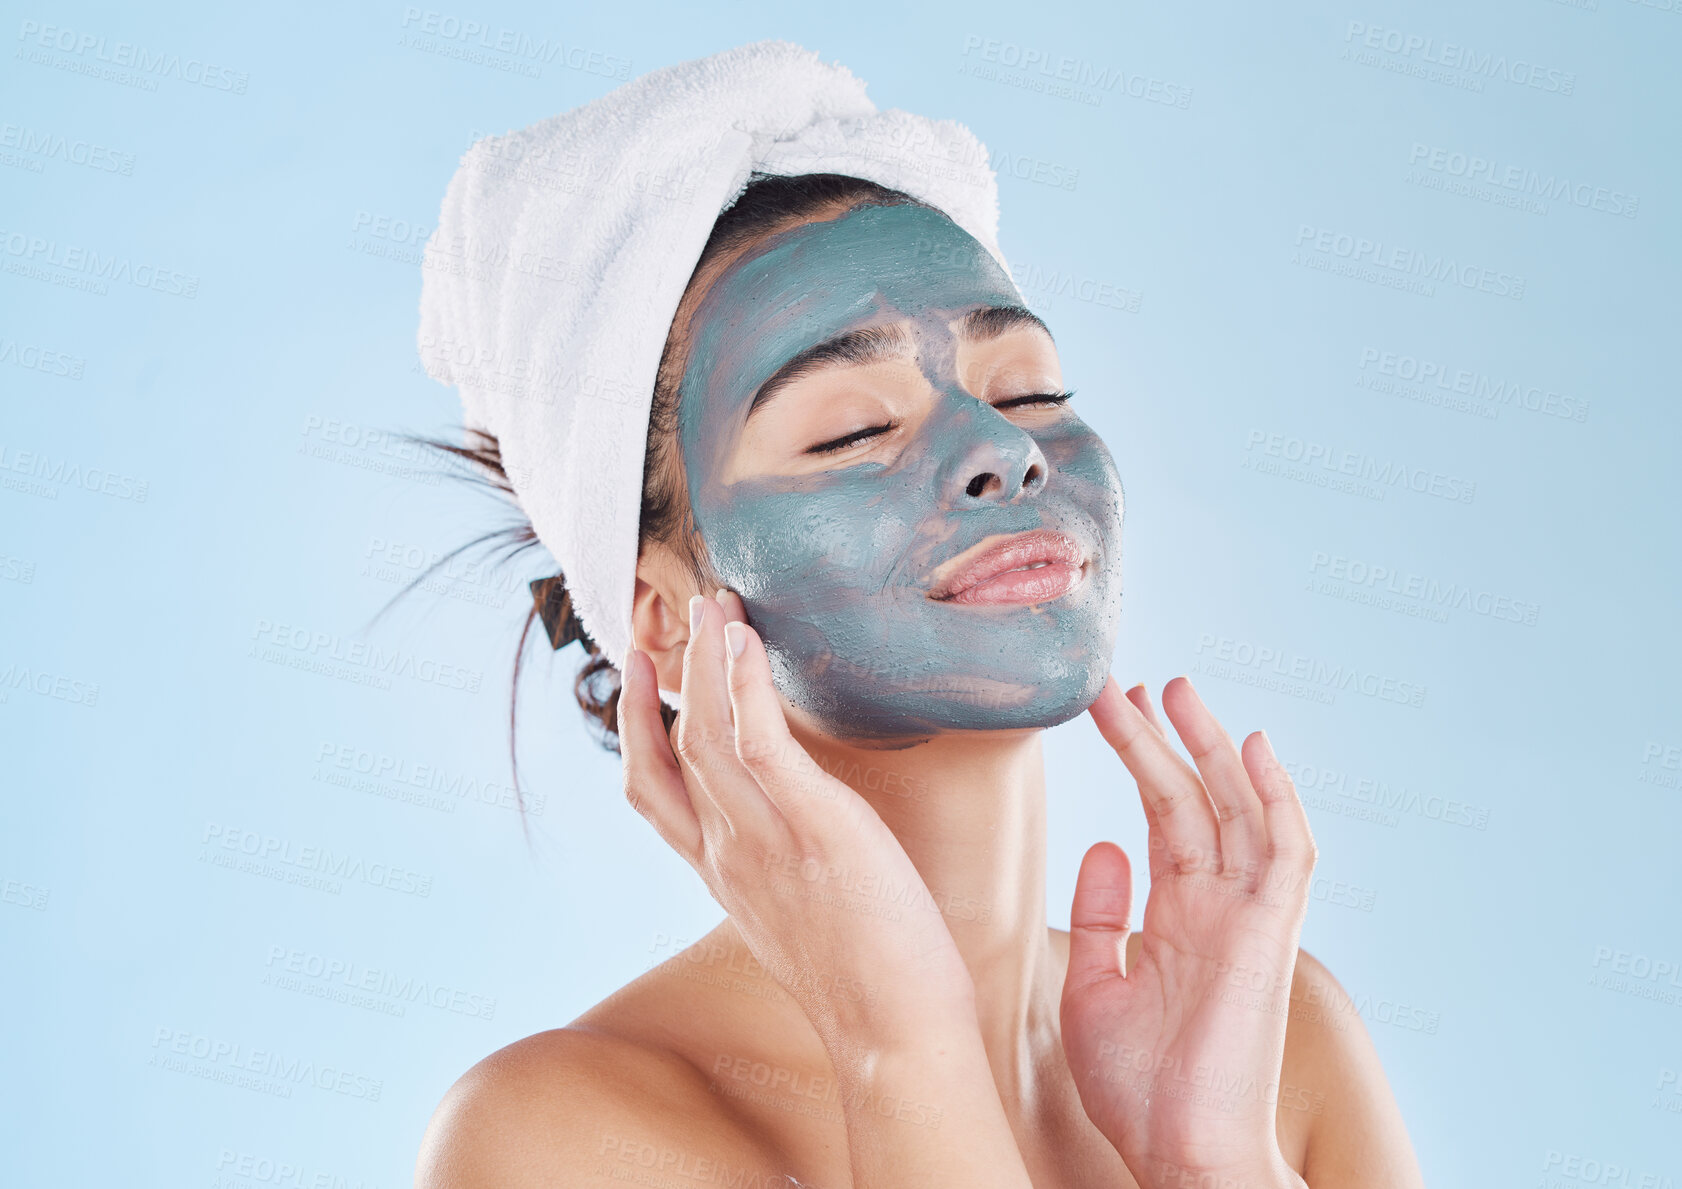 Buy stock photo Skincare, body wellness and charcoal face mask for healthy woman skin against blue mockup studio background. Young, happy and beauty cosmetic model with antiaging product for wellbeing and grooming